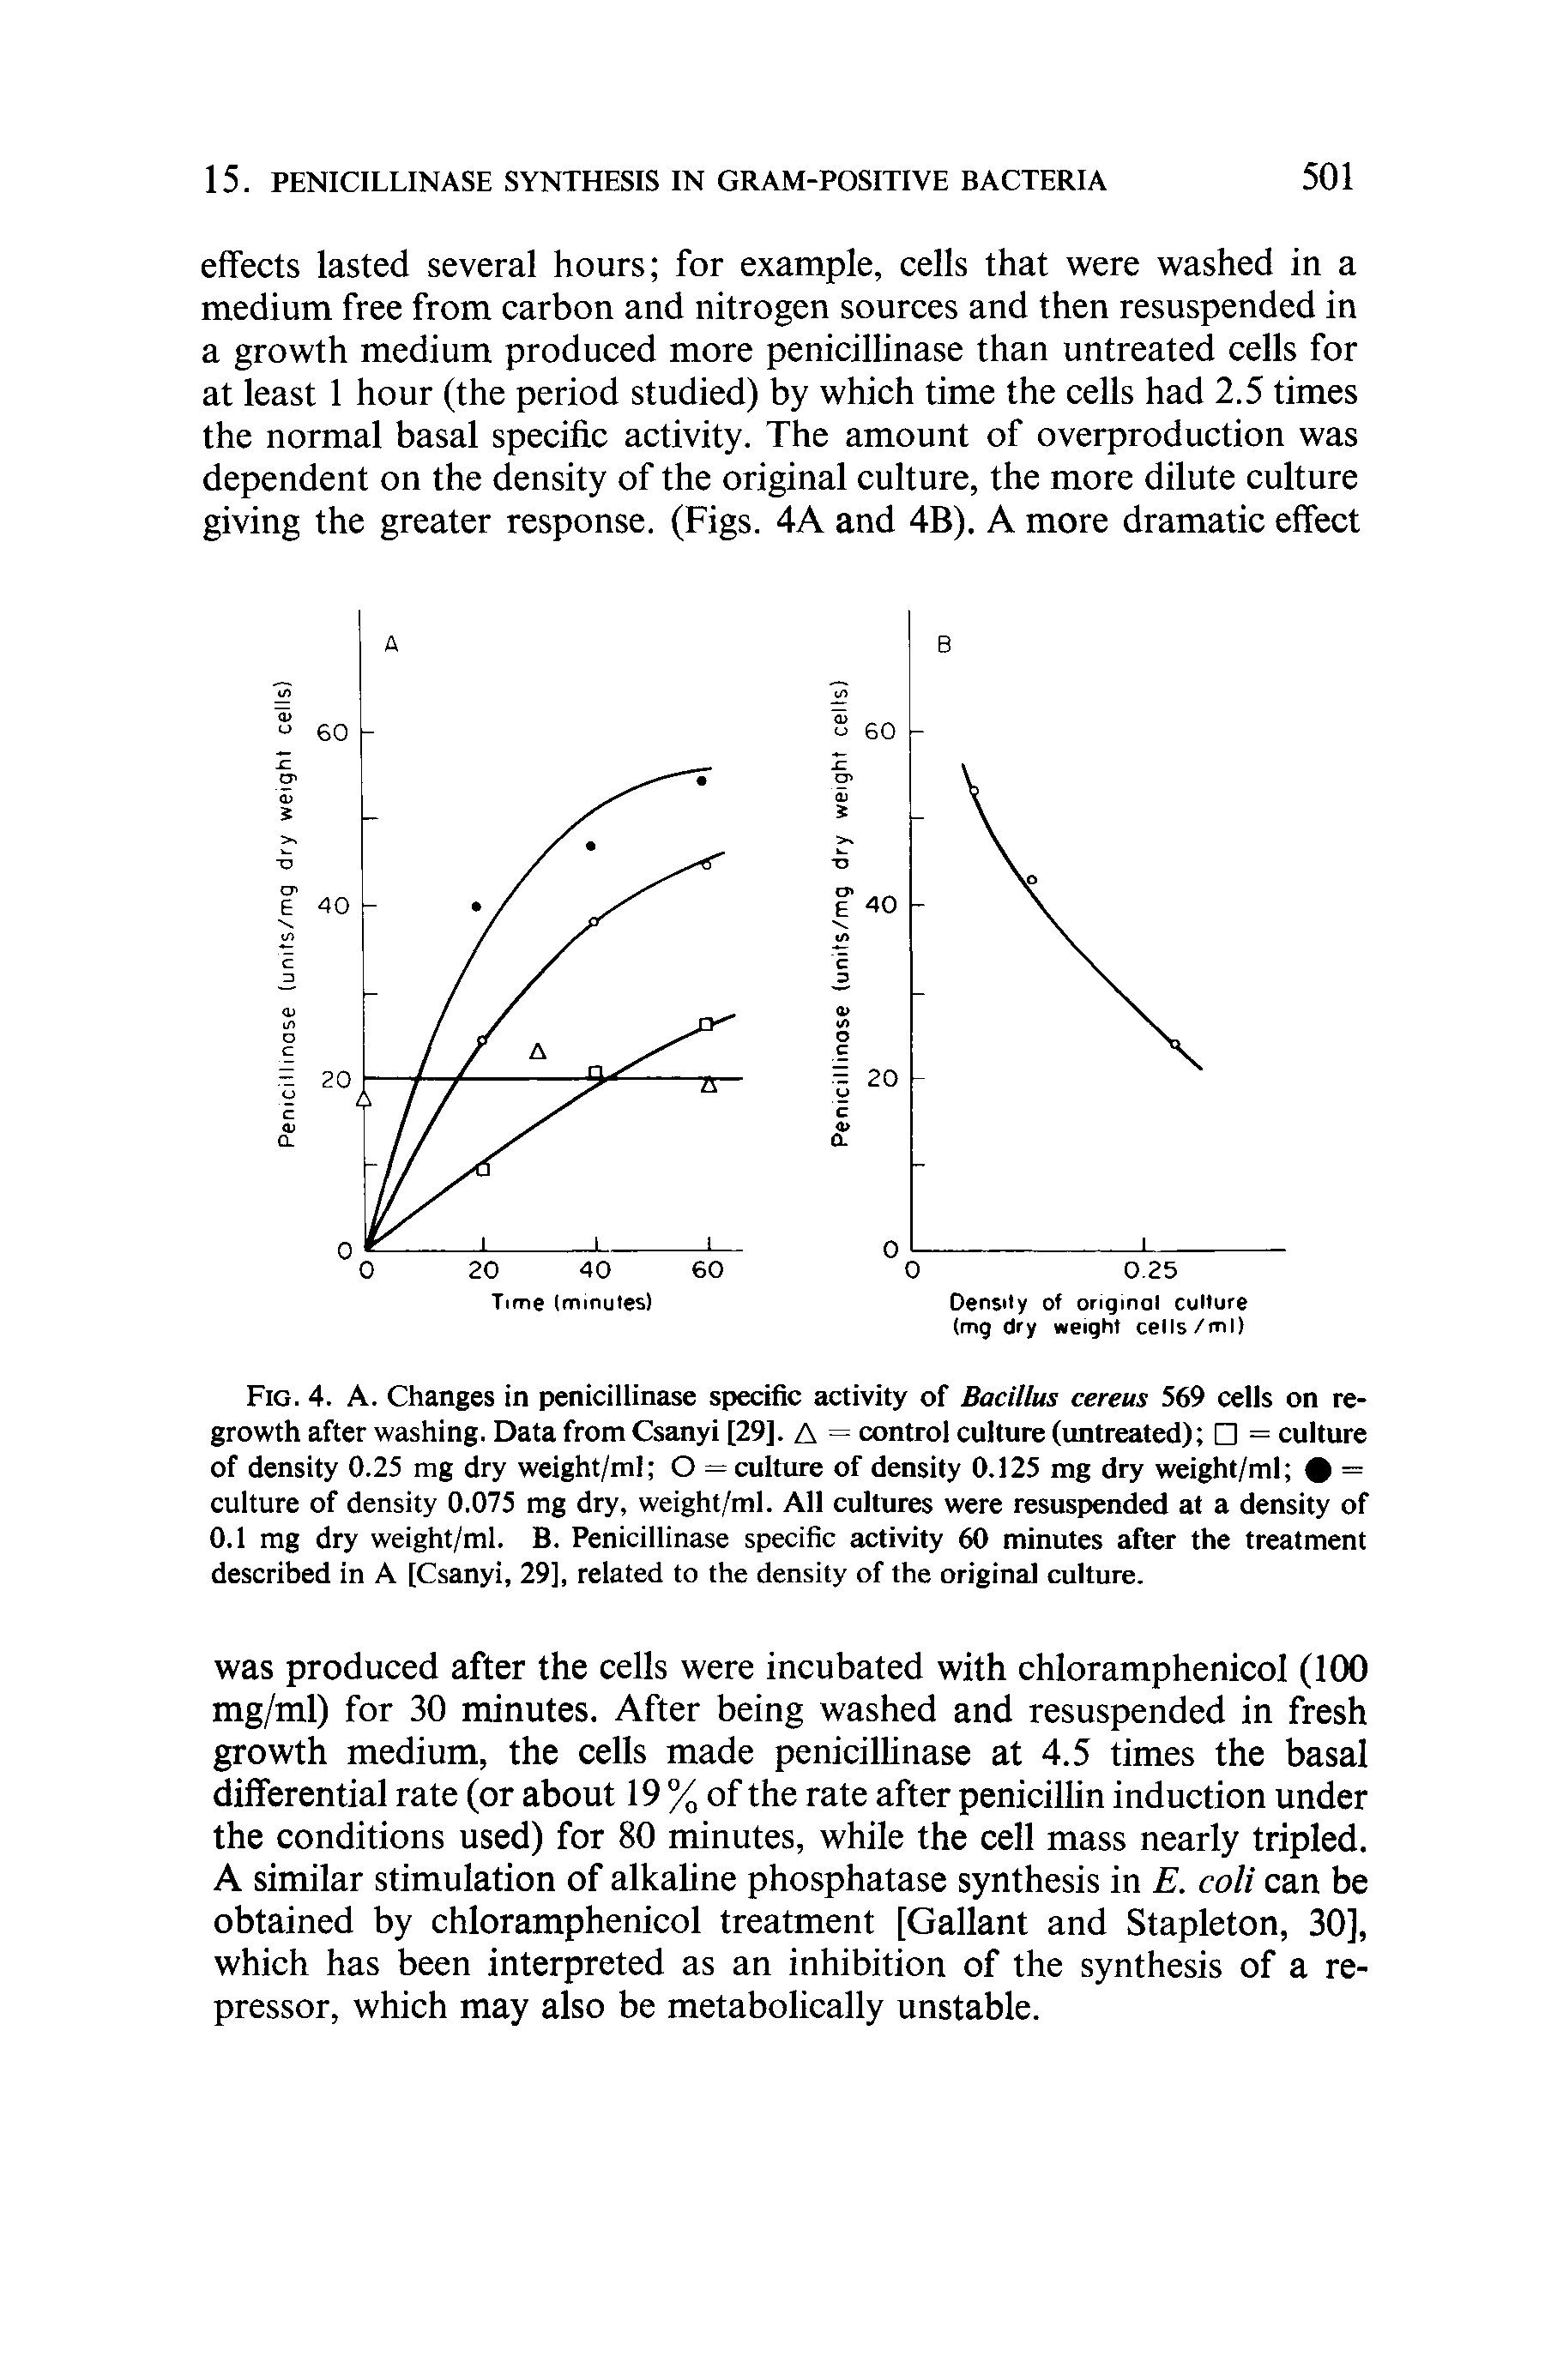 Fig. 4. A. Changes in penicillinase specific activity of Bacillus cereus 569 cells on re-growth after washing. Data from Csanyi [29]. A = control culture (untreated) = culture of density 0.25 mg dry weight/ml O = culture of density 0.125 mg dry weight/ml = culture of density 0.075 mg dry, weight/ml. All cultures were resuspended at a density of 0.1 mg dry weight/ml. B. Penicillinase specific activity 60 minutes after the treatment described in A [Csanyi, 29], related to the density of the original culture.